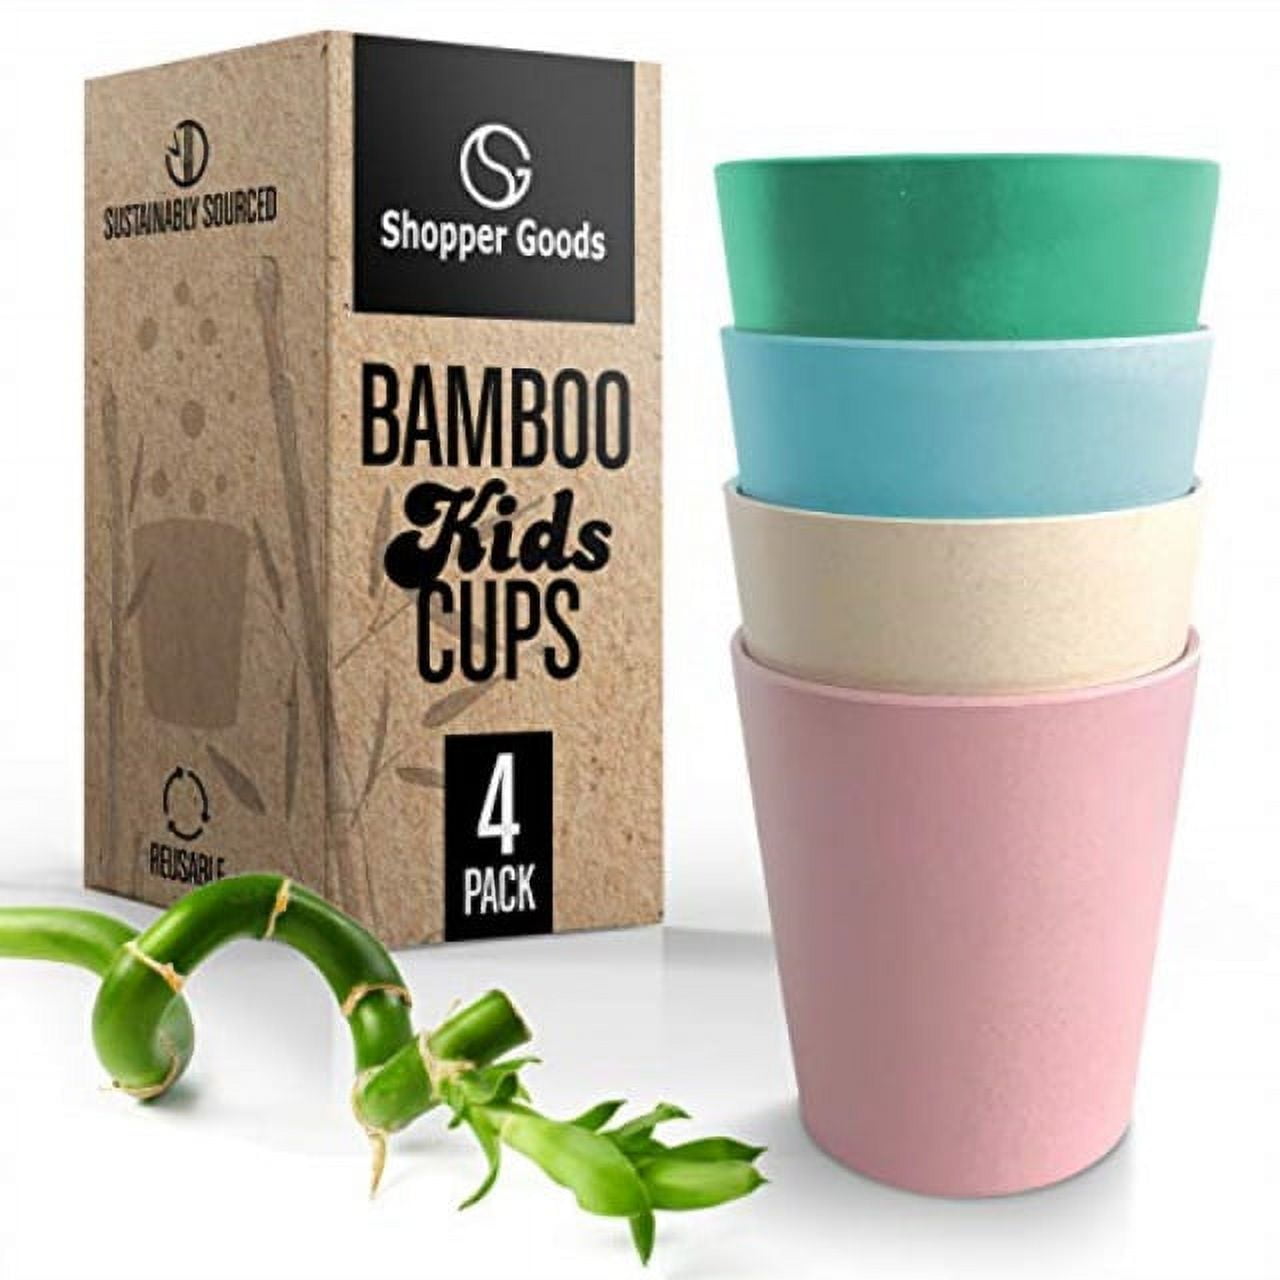 Safe, Eco-Friendly Non-Toxic Sippy Cup Review